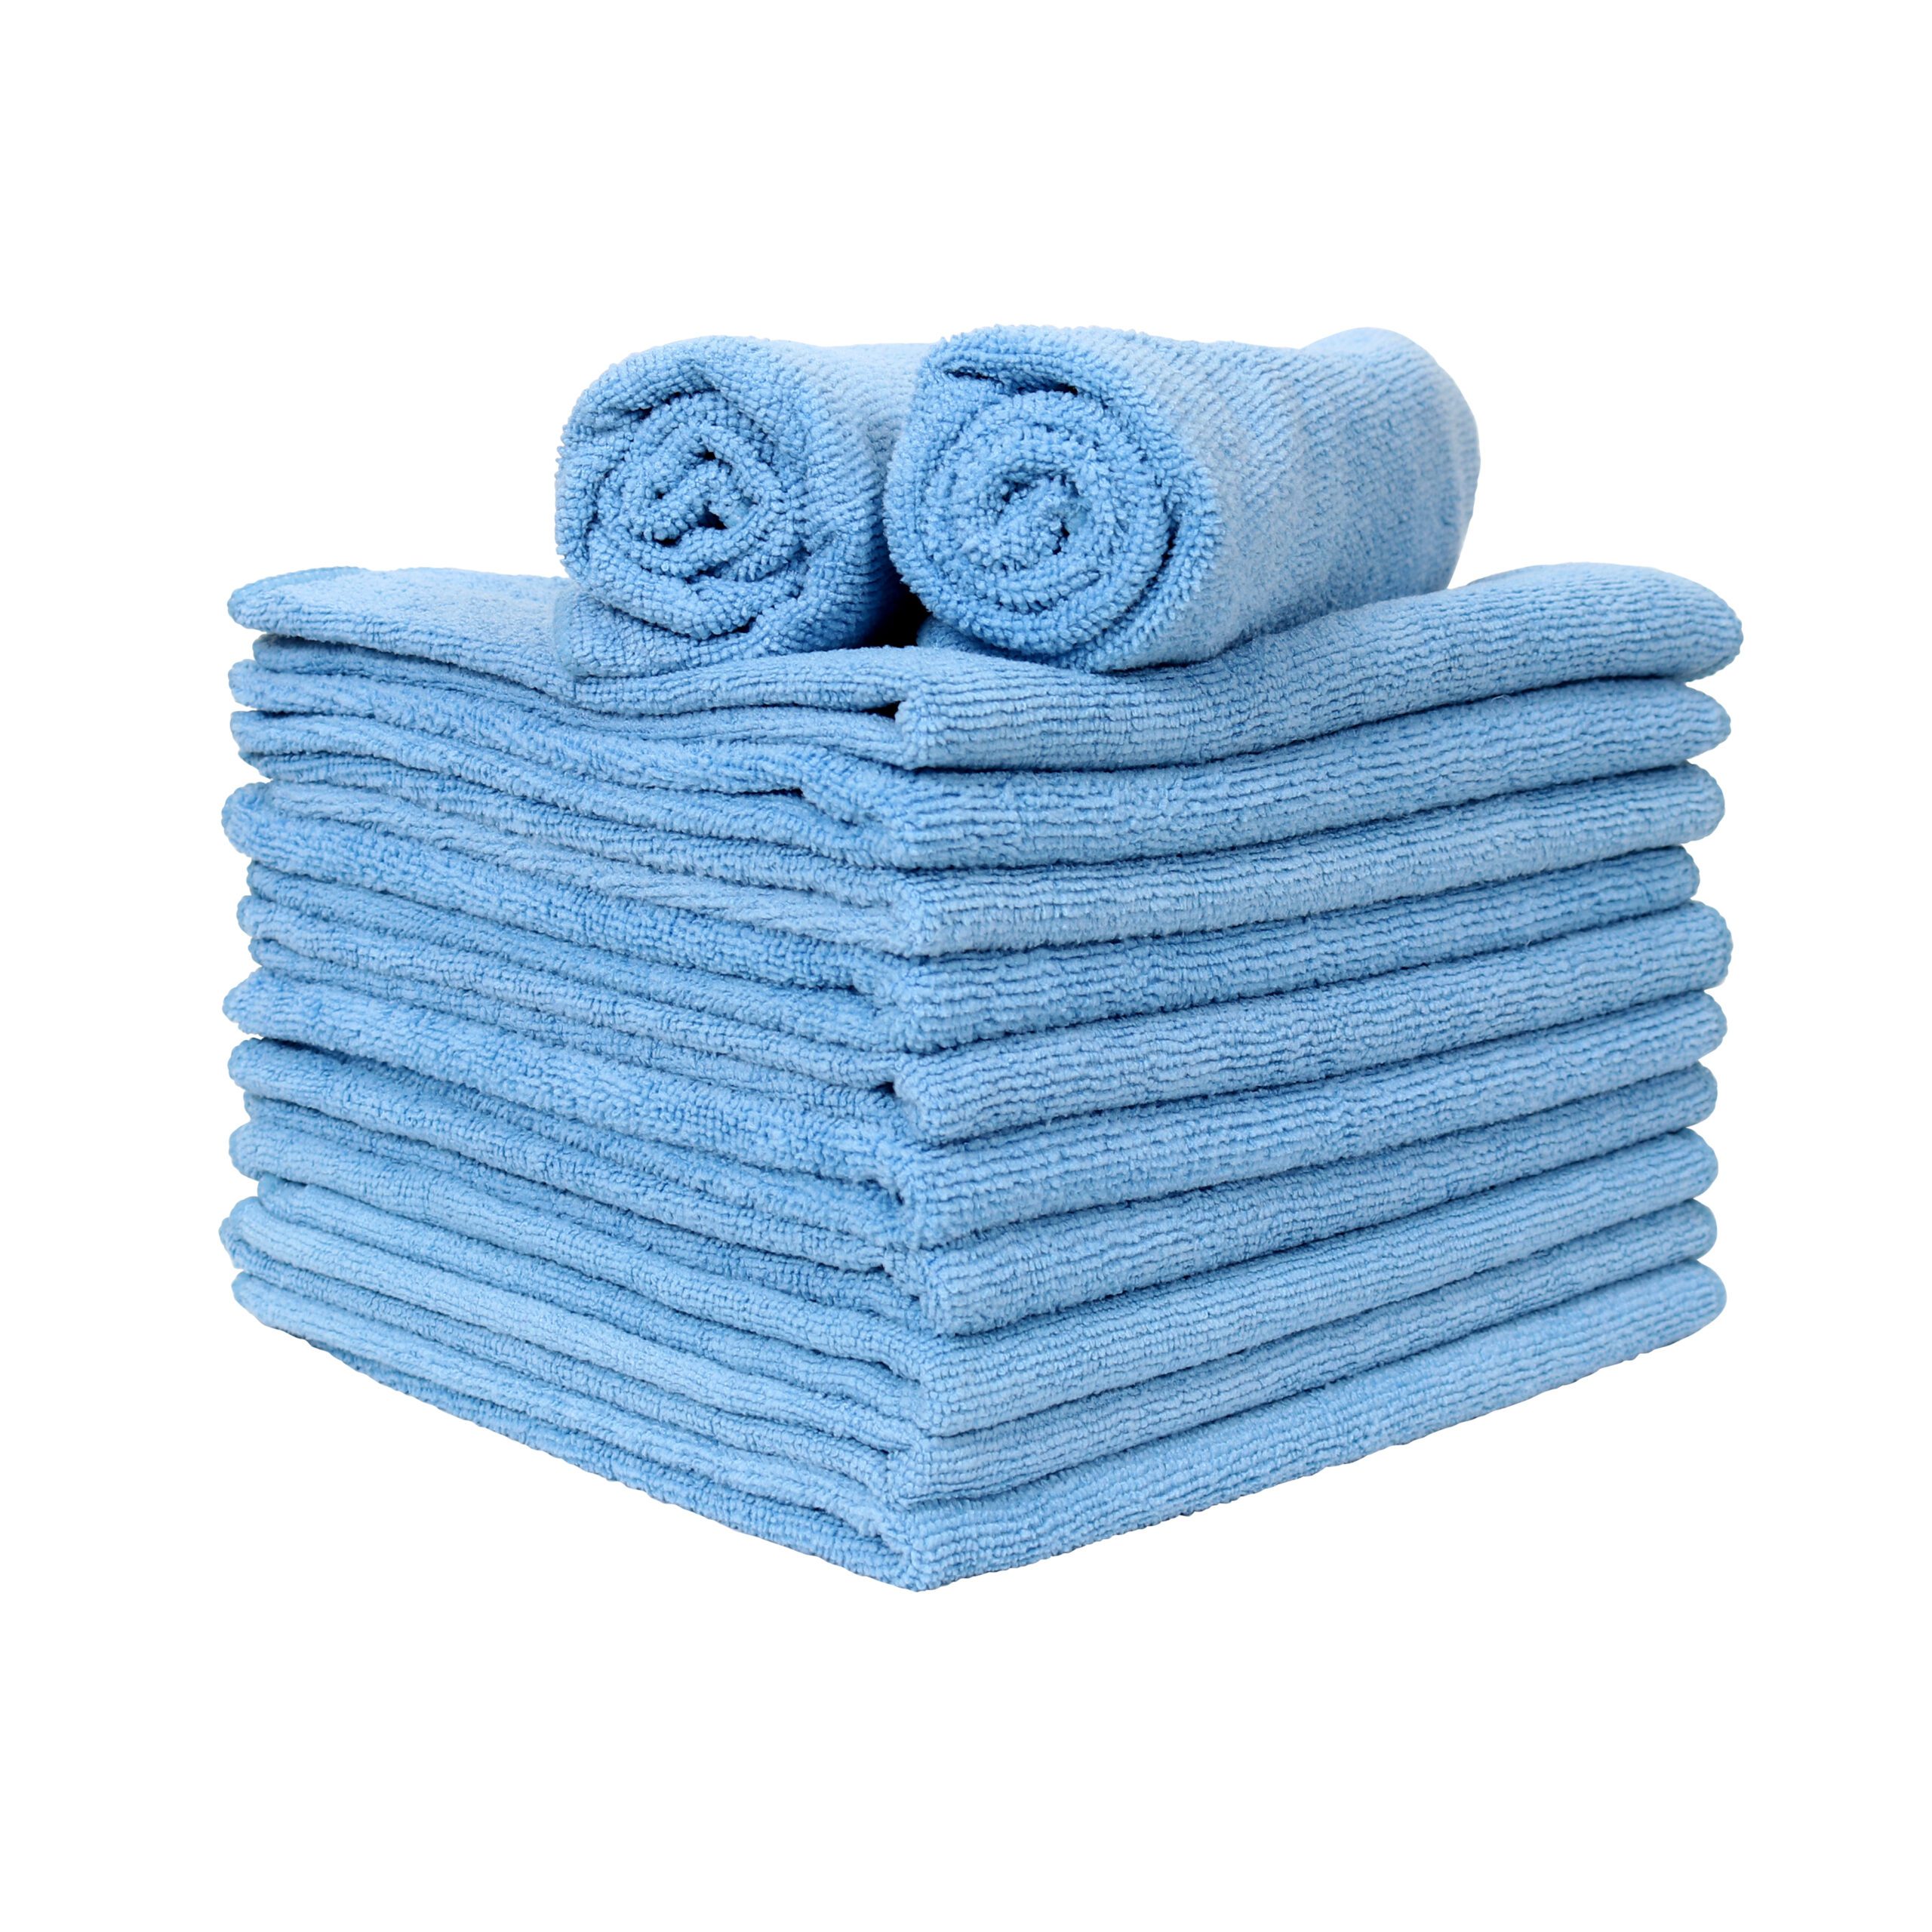 Microfiber Dusting and Cleaning Cloths - The Clean Team